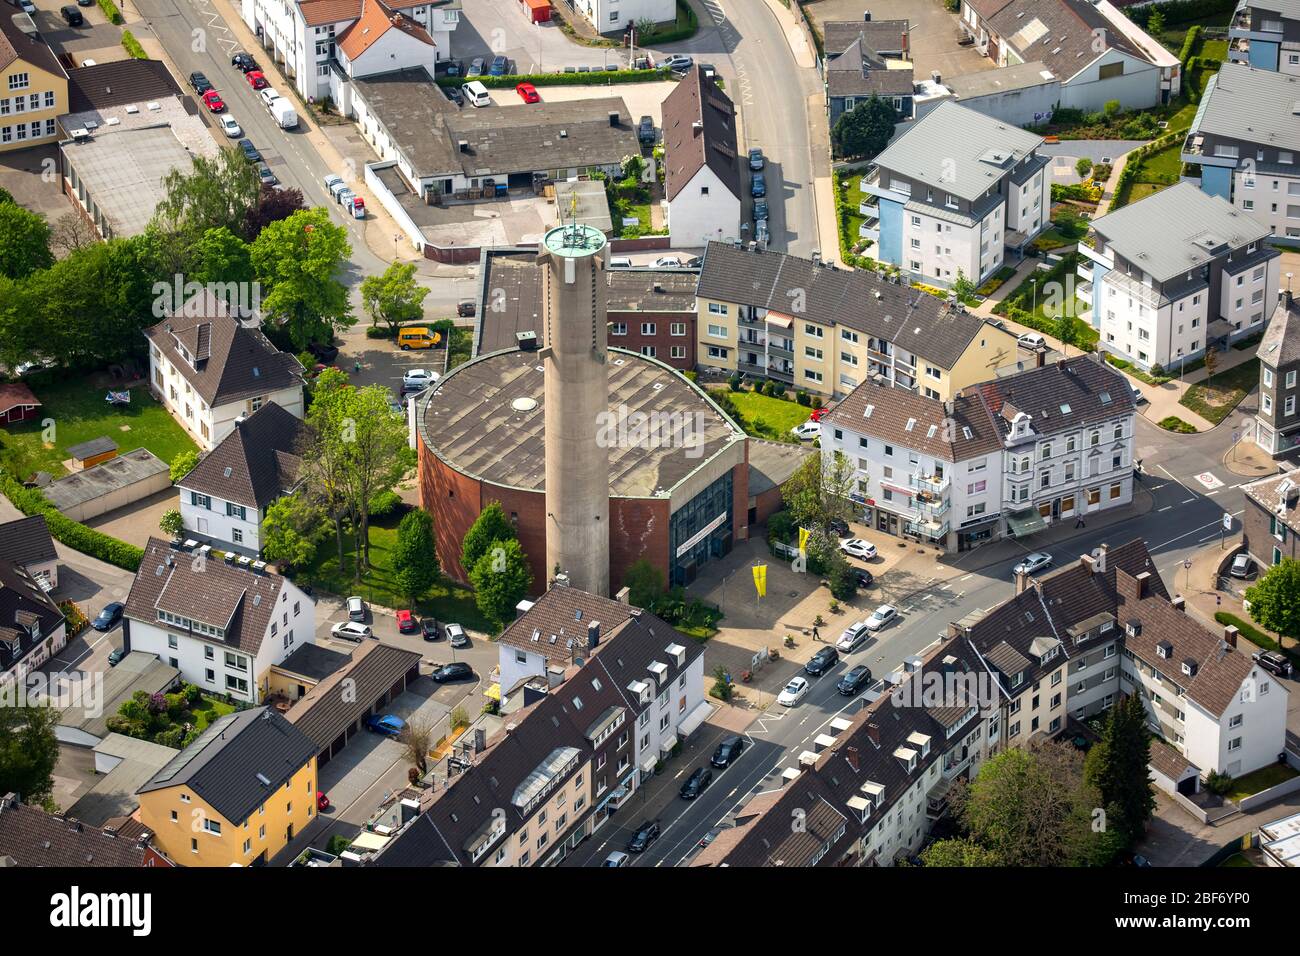 , Church St. Marien in the old city of Schwelm, 11.05.2016, aerial view, Germany, North Rhine-Westphalia, Ruhr Area, Schwelm Stock Photo